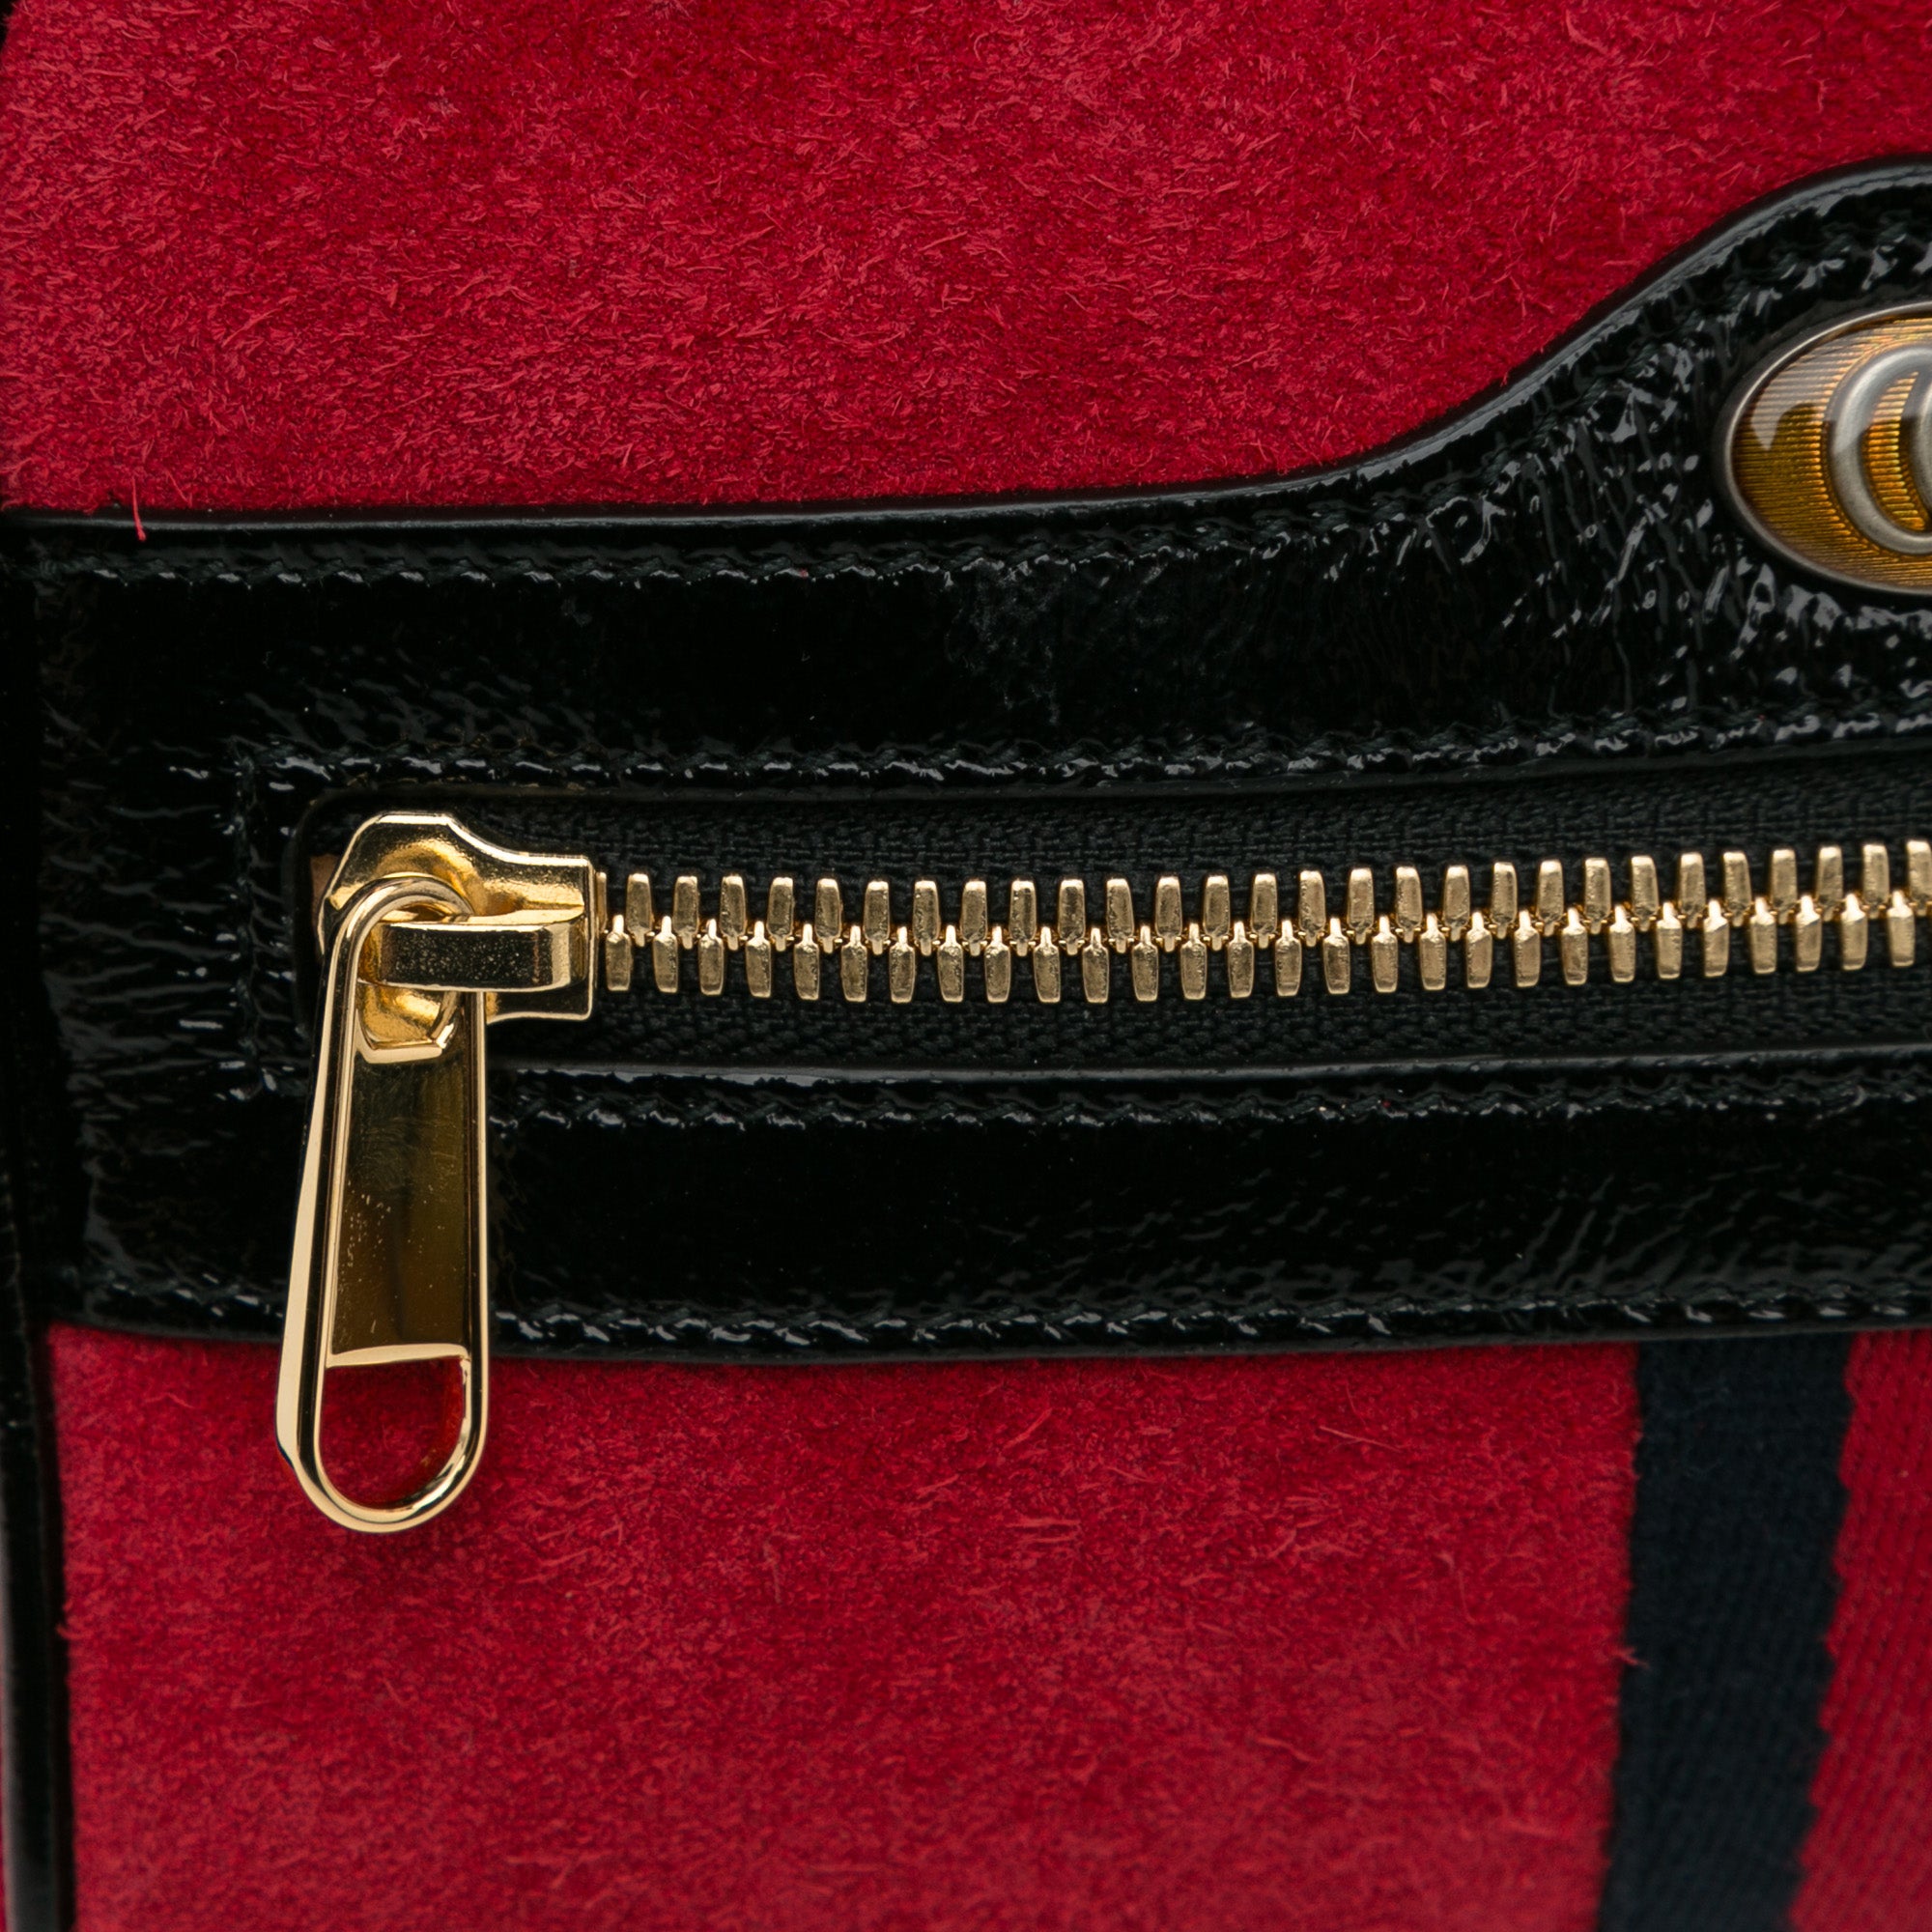 Gucci Ophidia Small Suede Belt Waist Bag in Red color